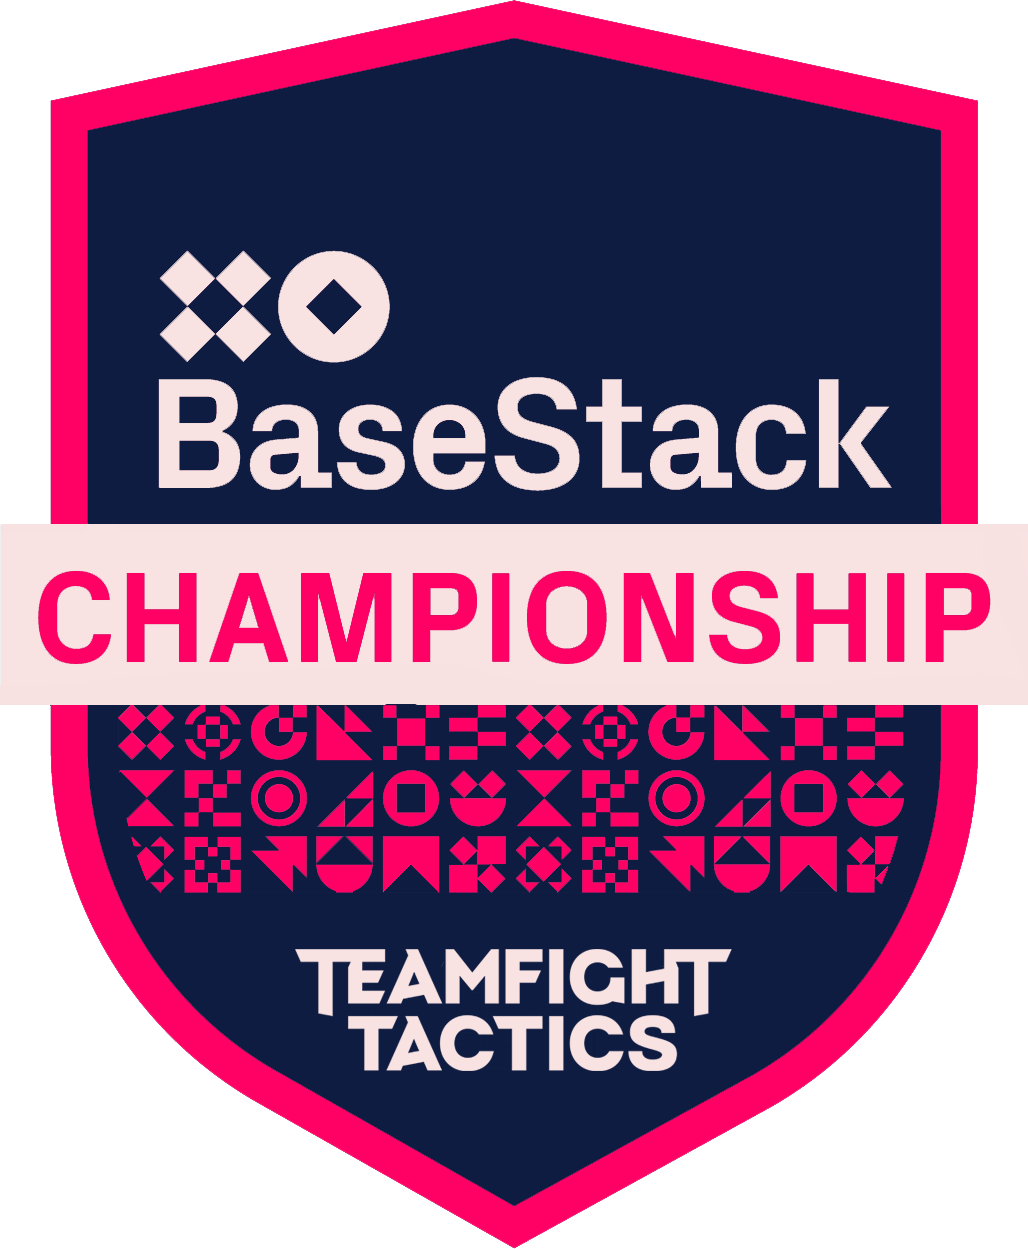 Basestack championship for Teamfight Tactics. Shield shaped and in neon pink and blue colors.